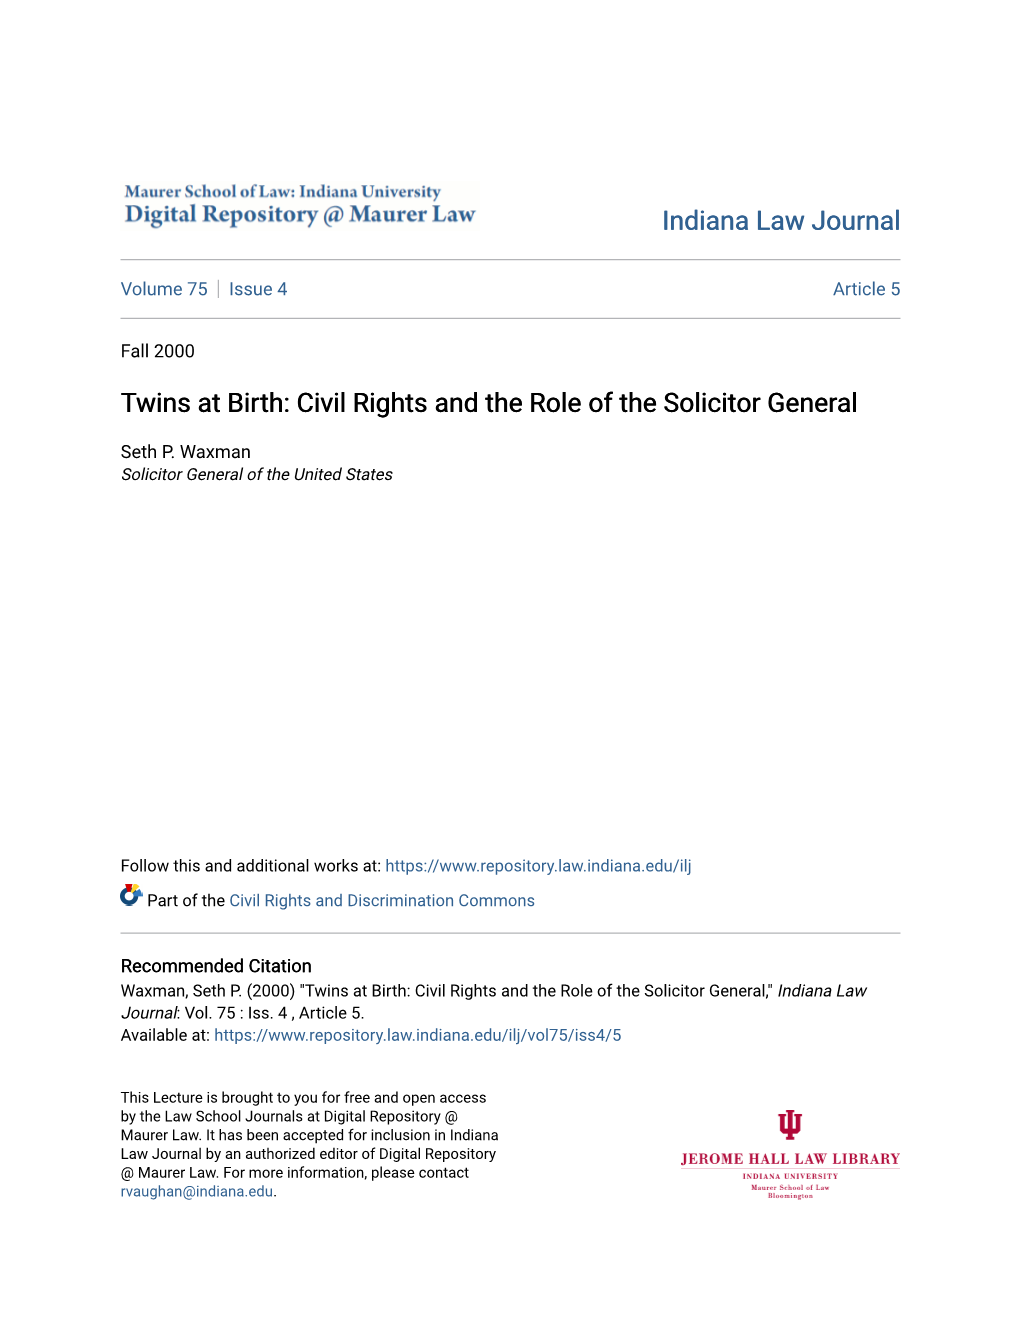 Twins at Birth: Civil Rights and the Role of the Solicitor General